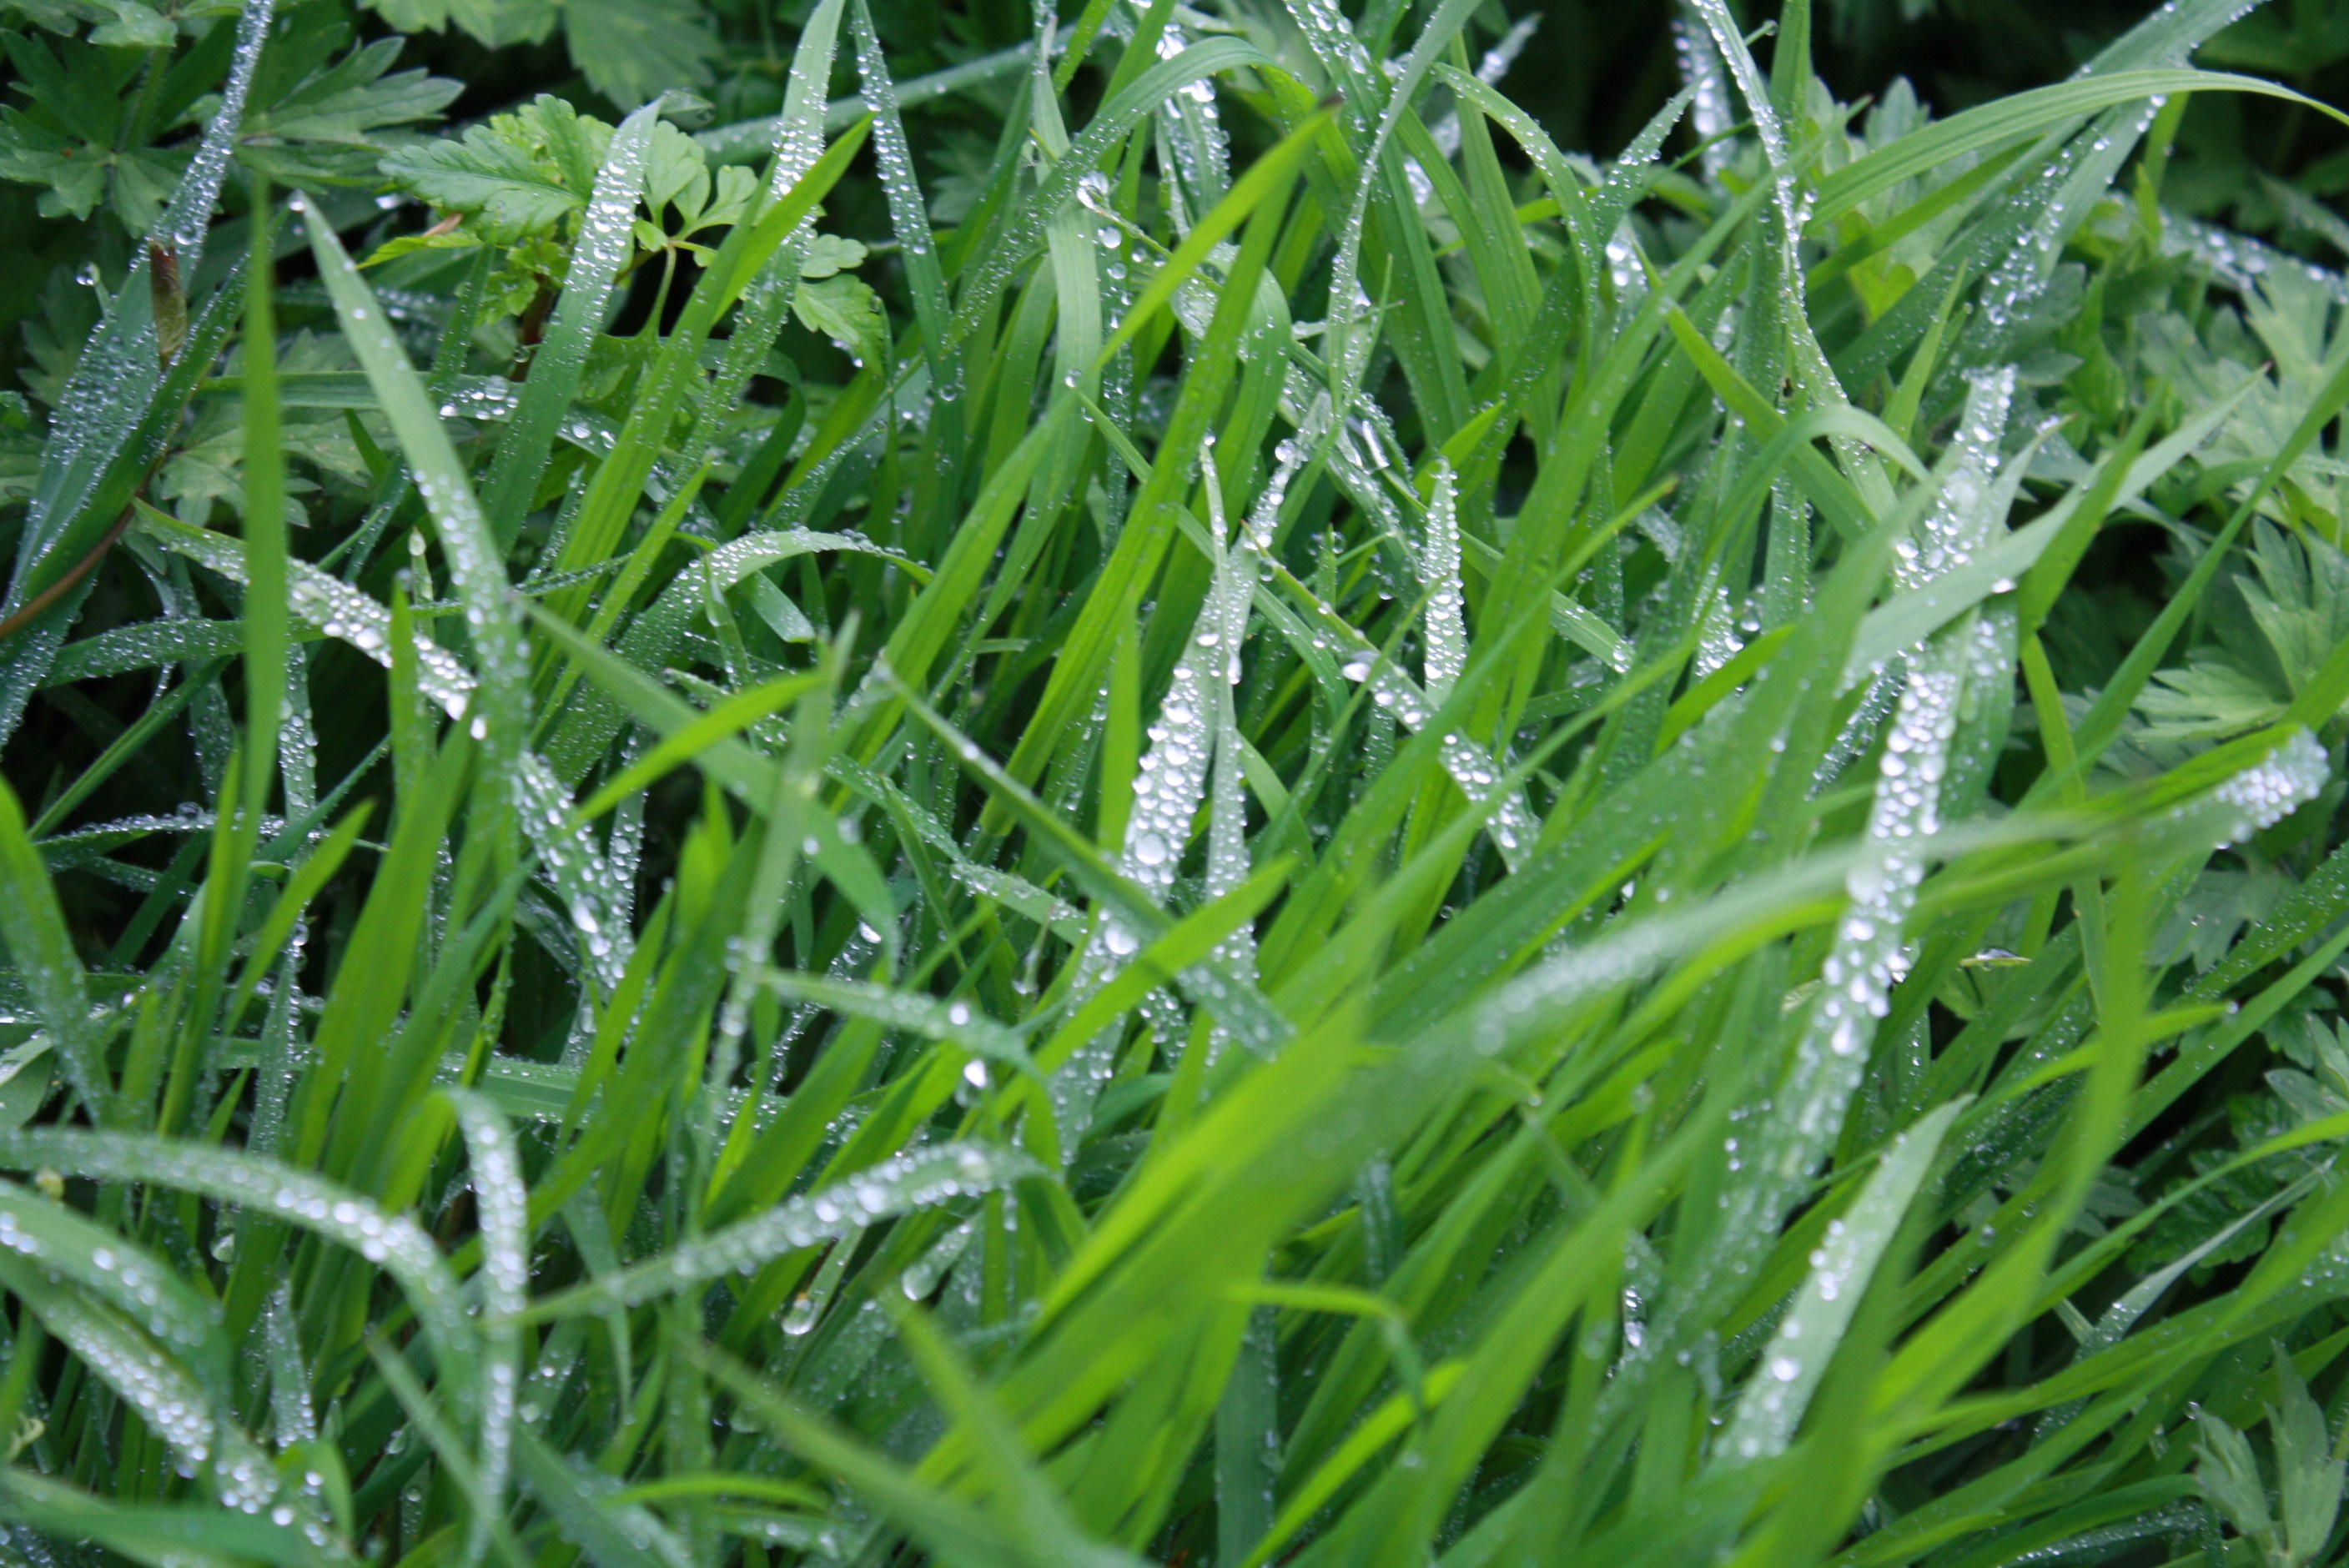 Desktop background daily diamonds - fresh green spring grass with water droplets early morning